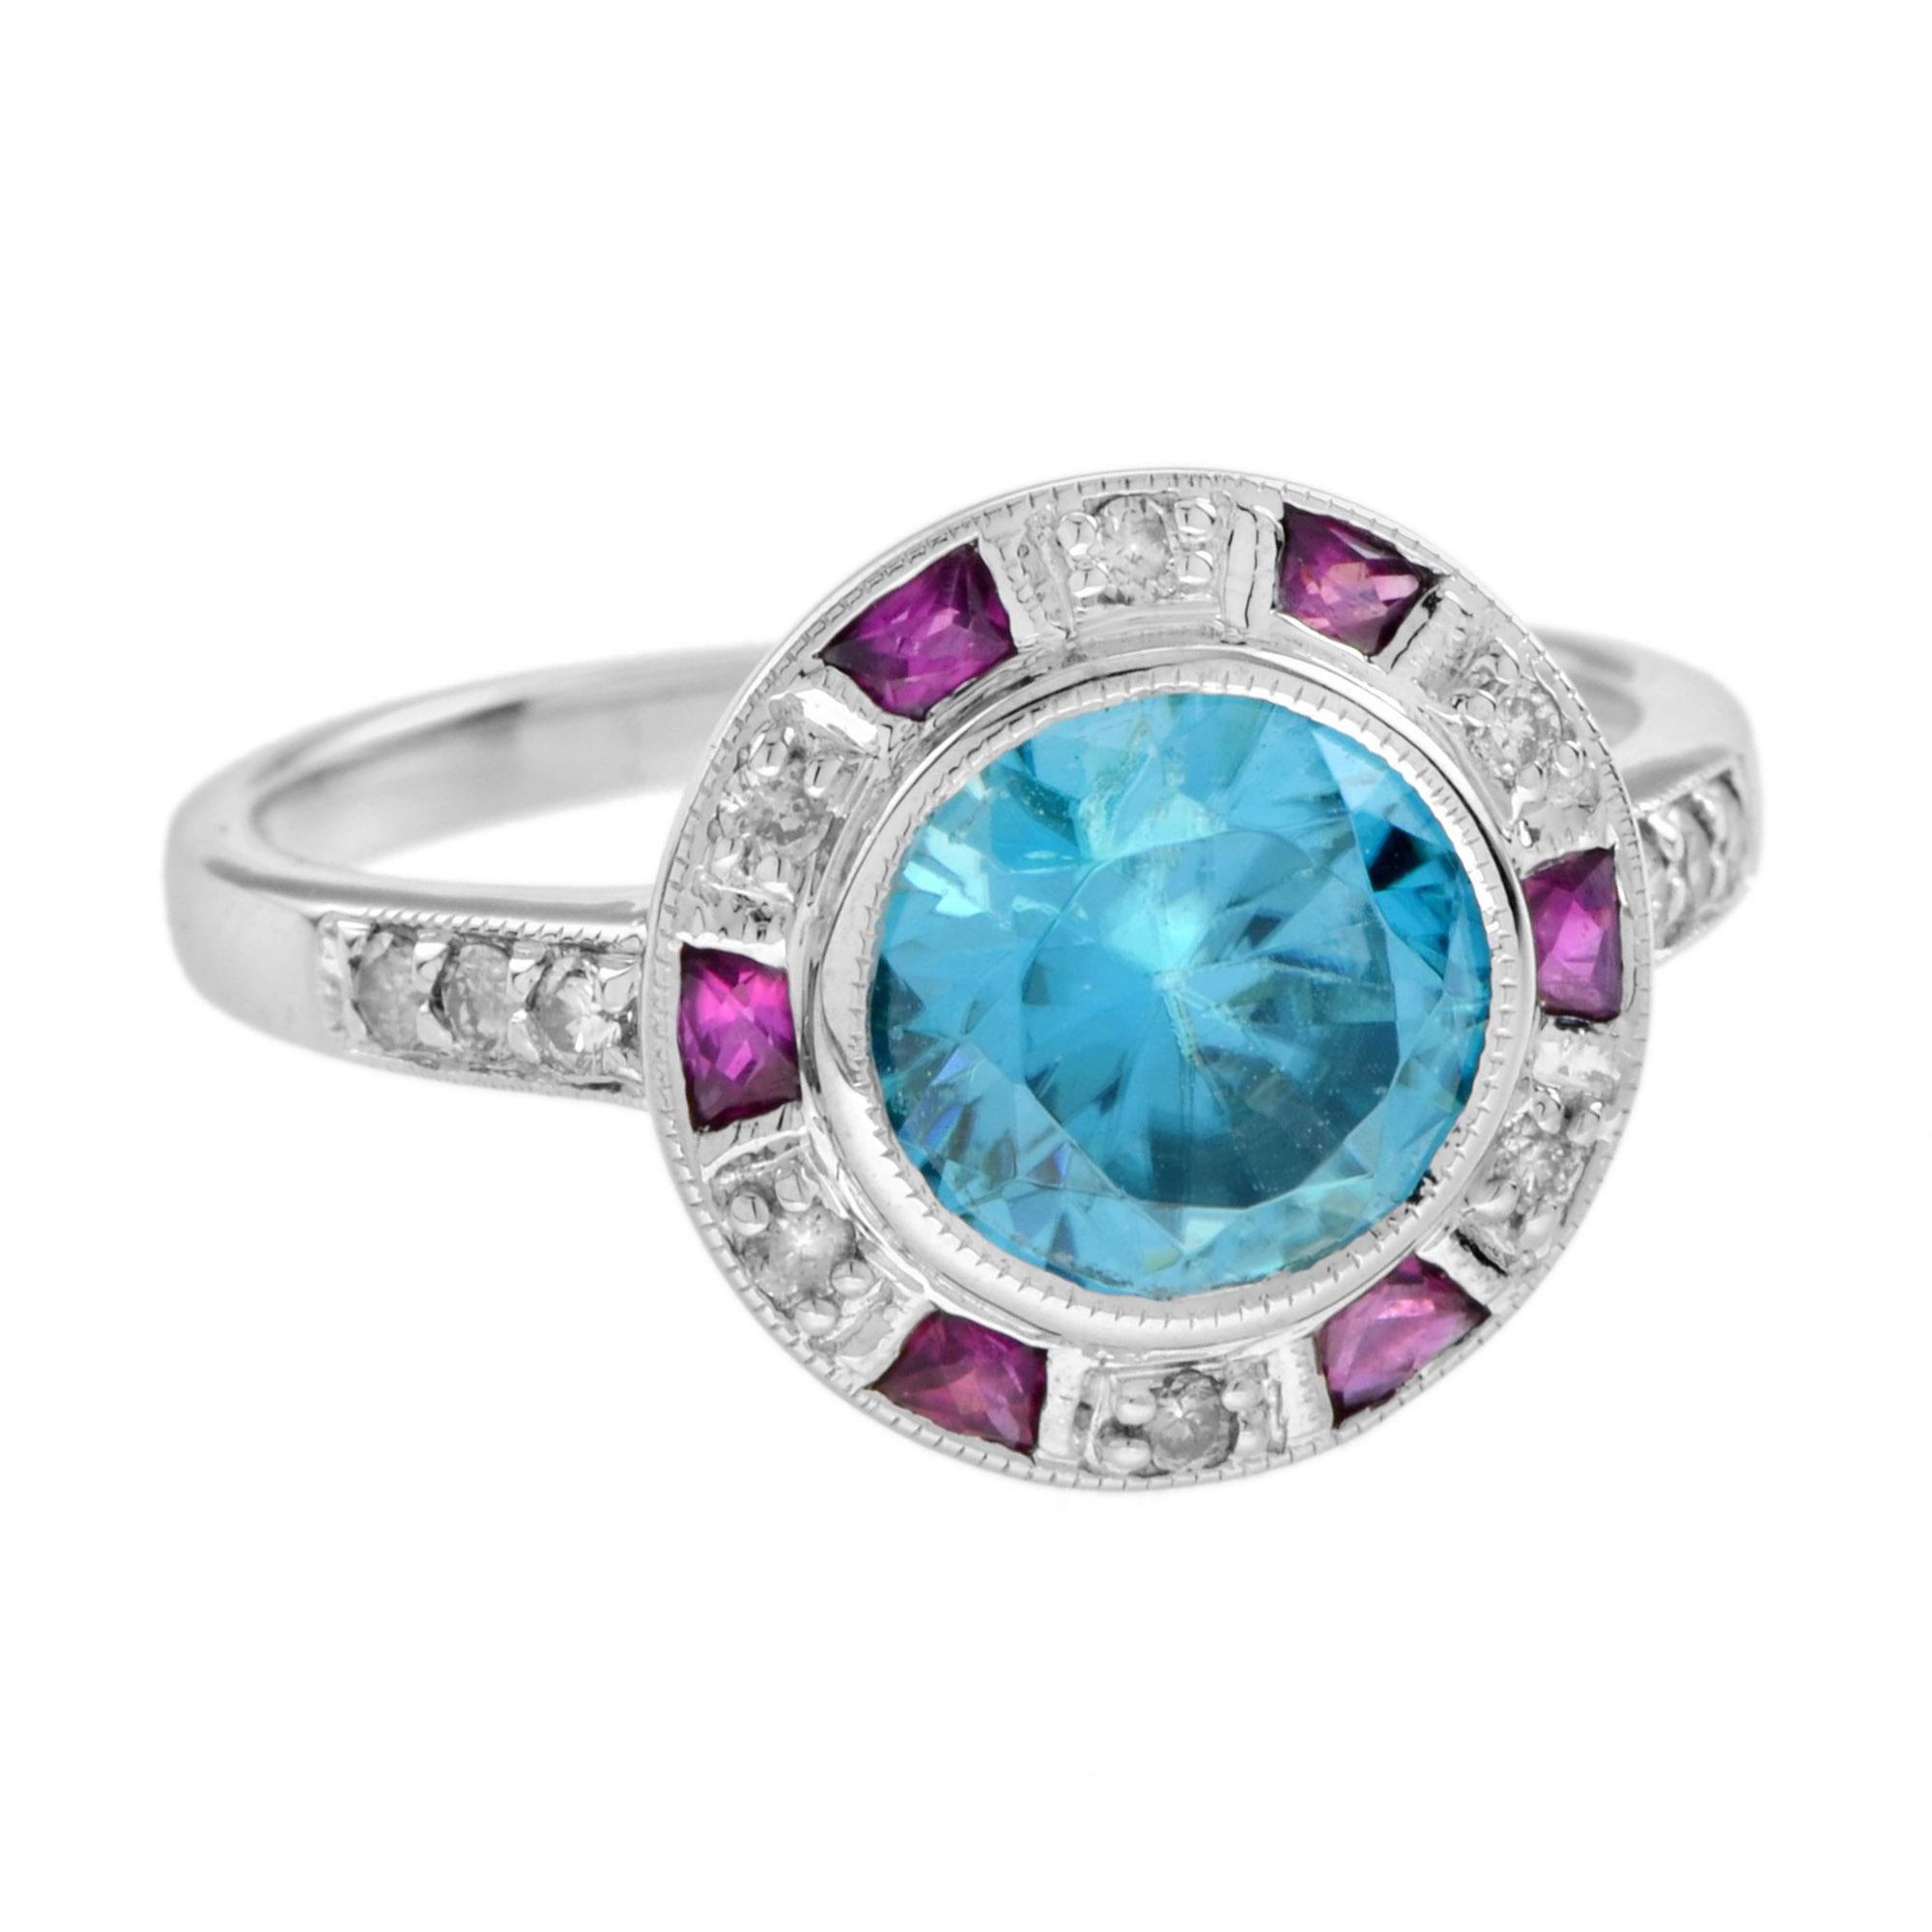 A lovely Art Deco inspired target ring in 14k white gold. The central round shaped icy blue hue blue zircon weights 2.75 carats and is surrounded by pink shade rubies and H color SI clarity diamonds. The shoulders of the ring is further with small